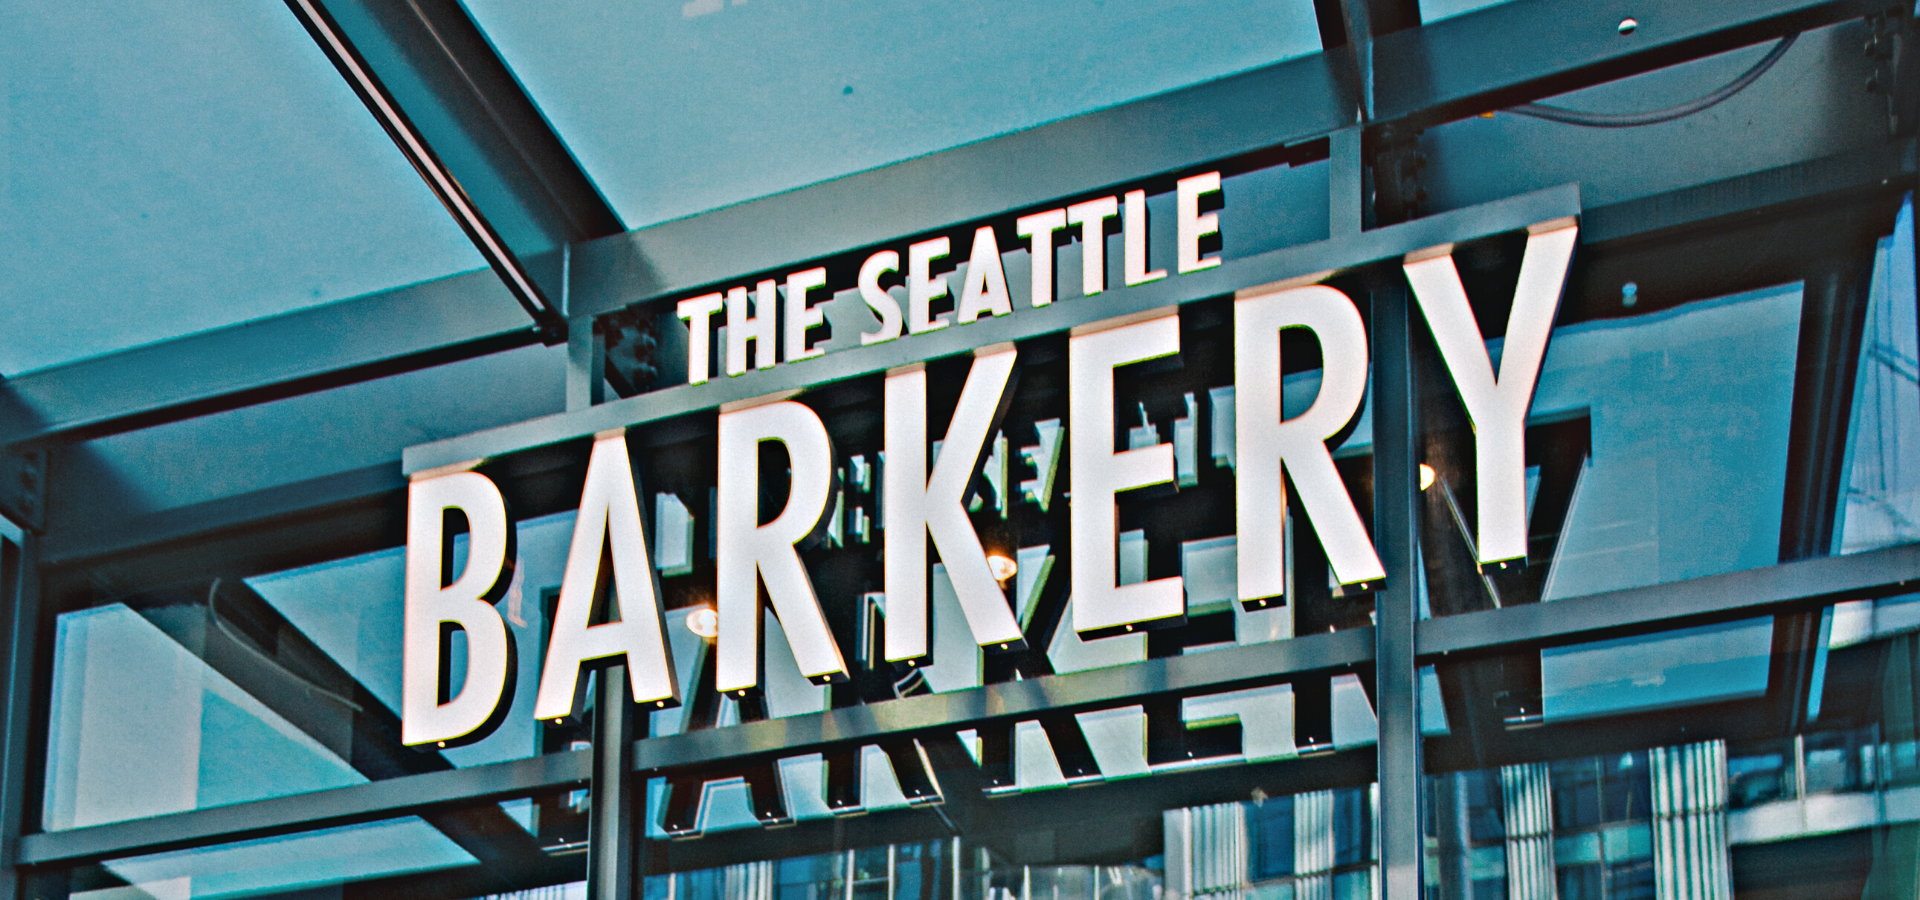 Exterior entrance of The Seattle Barkery.